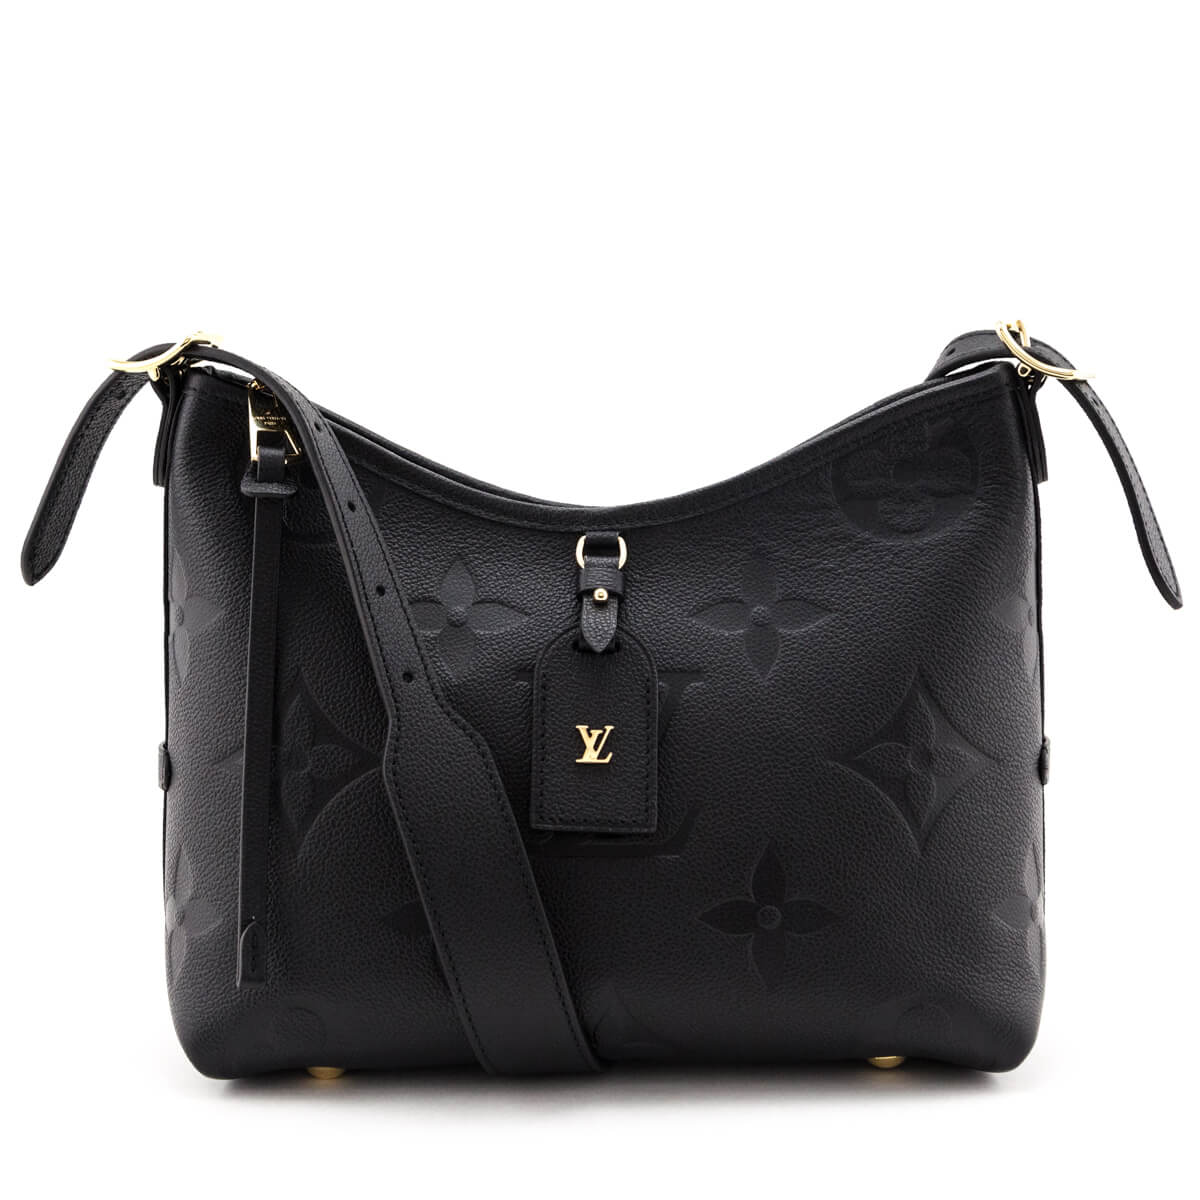 Louis Vuitton Carryall Pm Empreinte - 2 For Sale on 1stDibs